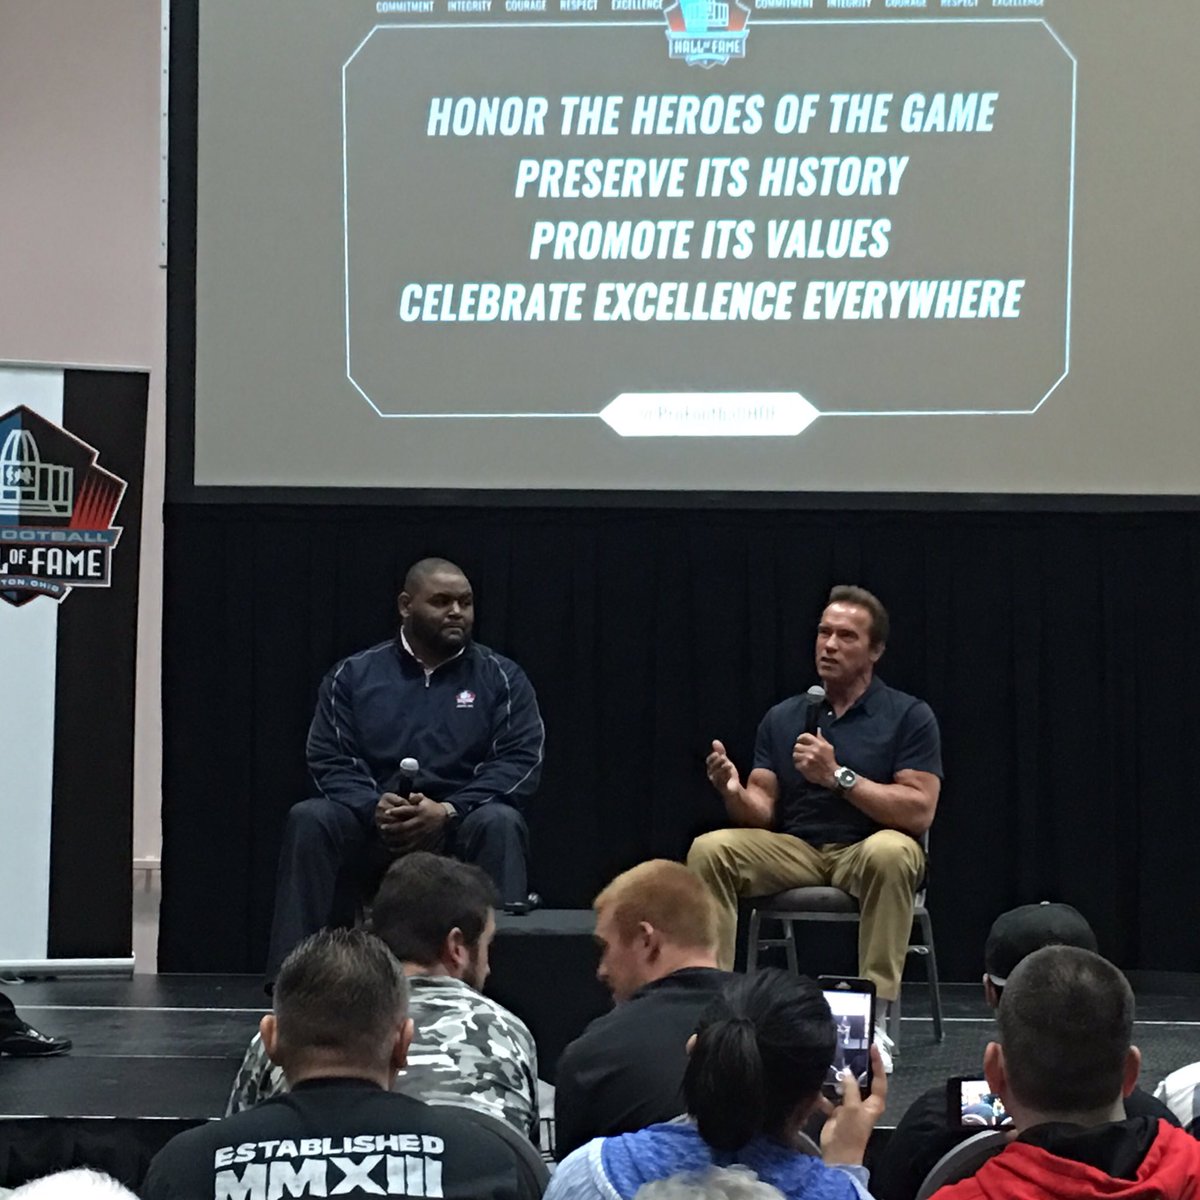 RT @ProFootballHOF: The room is packed for our chalk talk featuring @OrlandoPace_HOF and @Schwarzenegger at #ASF2016! https://t.co/oJHiaAet…